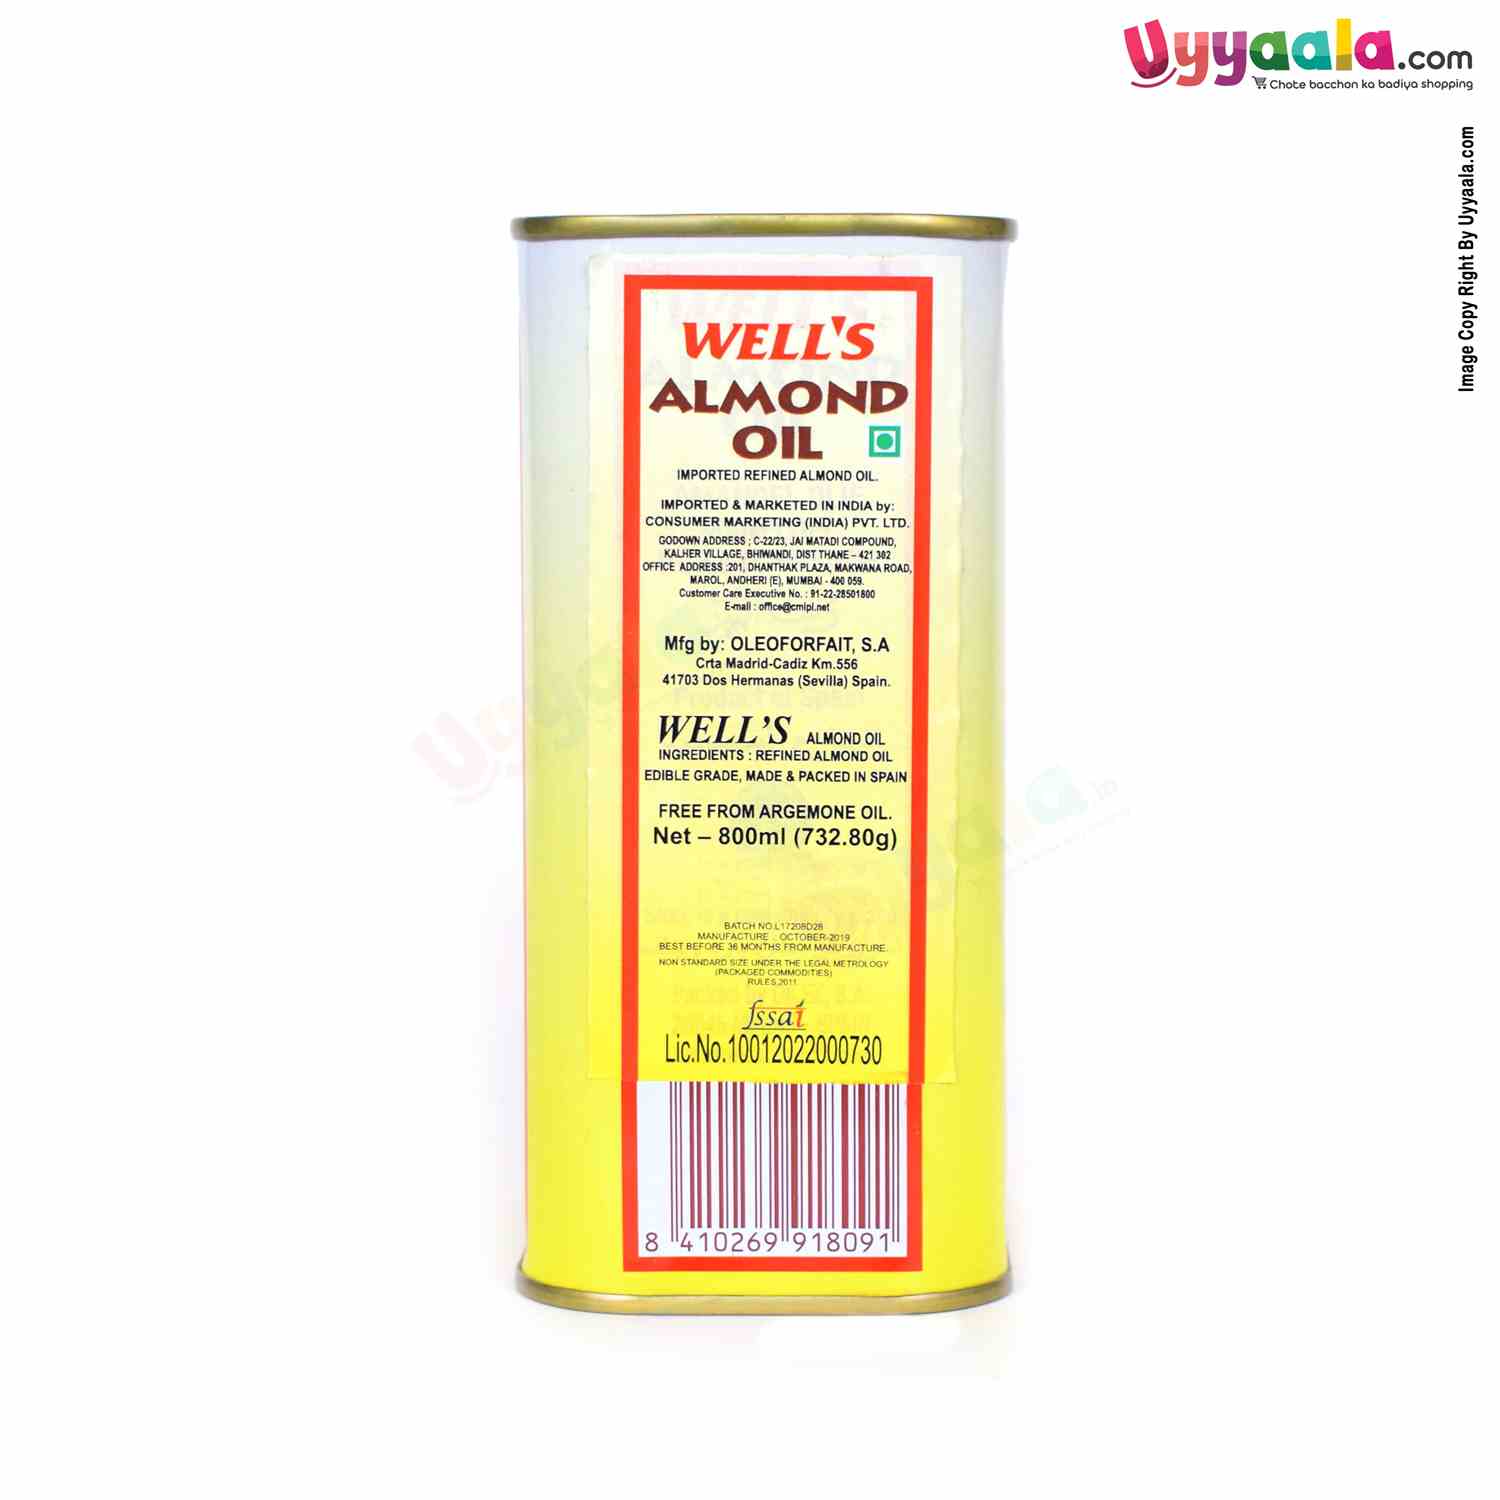 WELLS Almond Oil for Baby